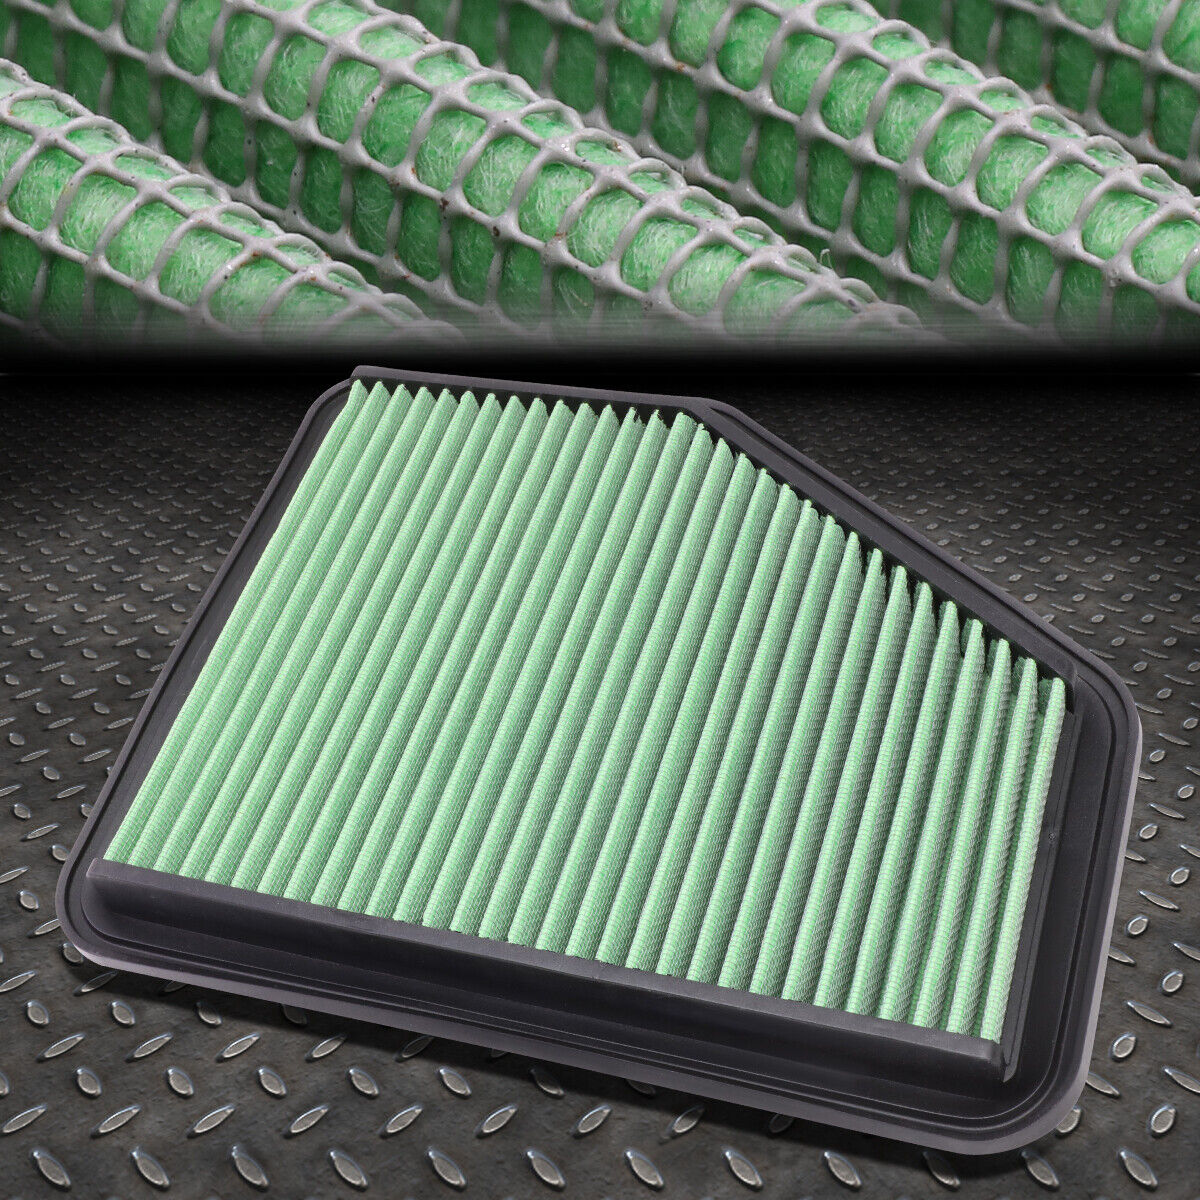 FOR 00-11 LEXUS GS300/GS350/GS450H/SC430 GREEN WASHABLE HIGH FLOW AIR FILTER